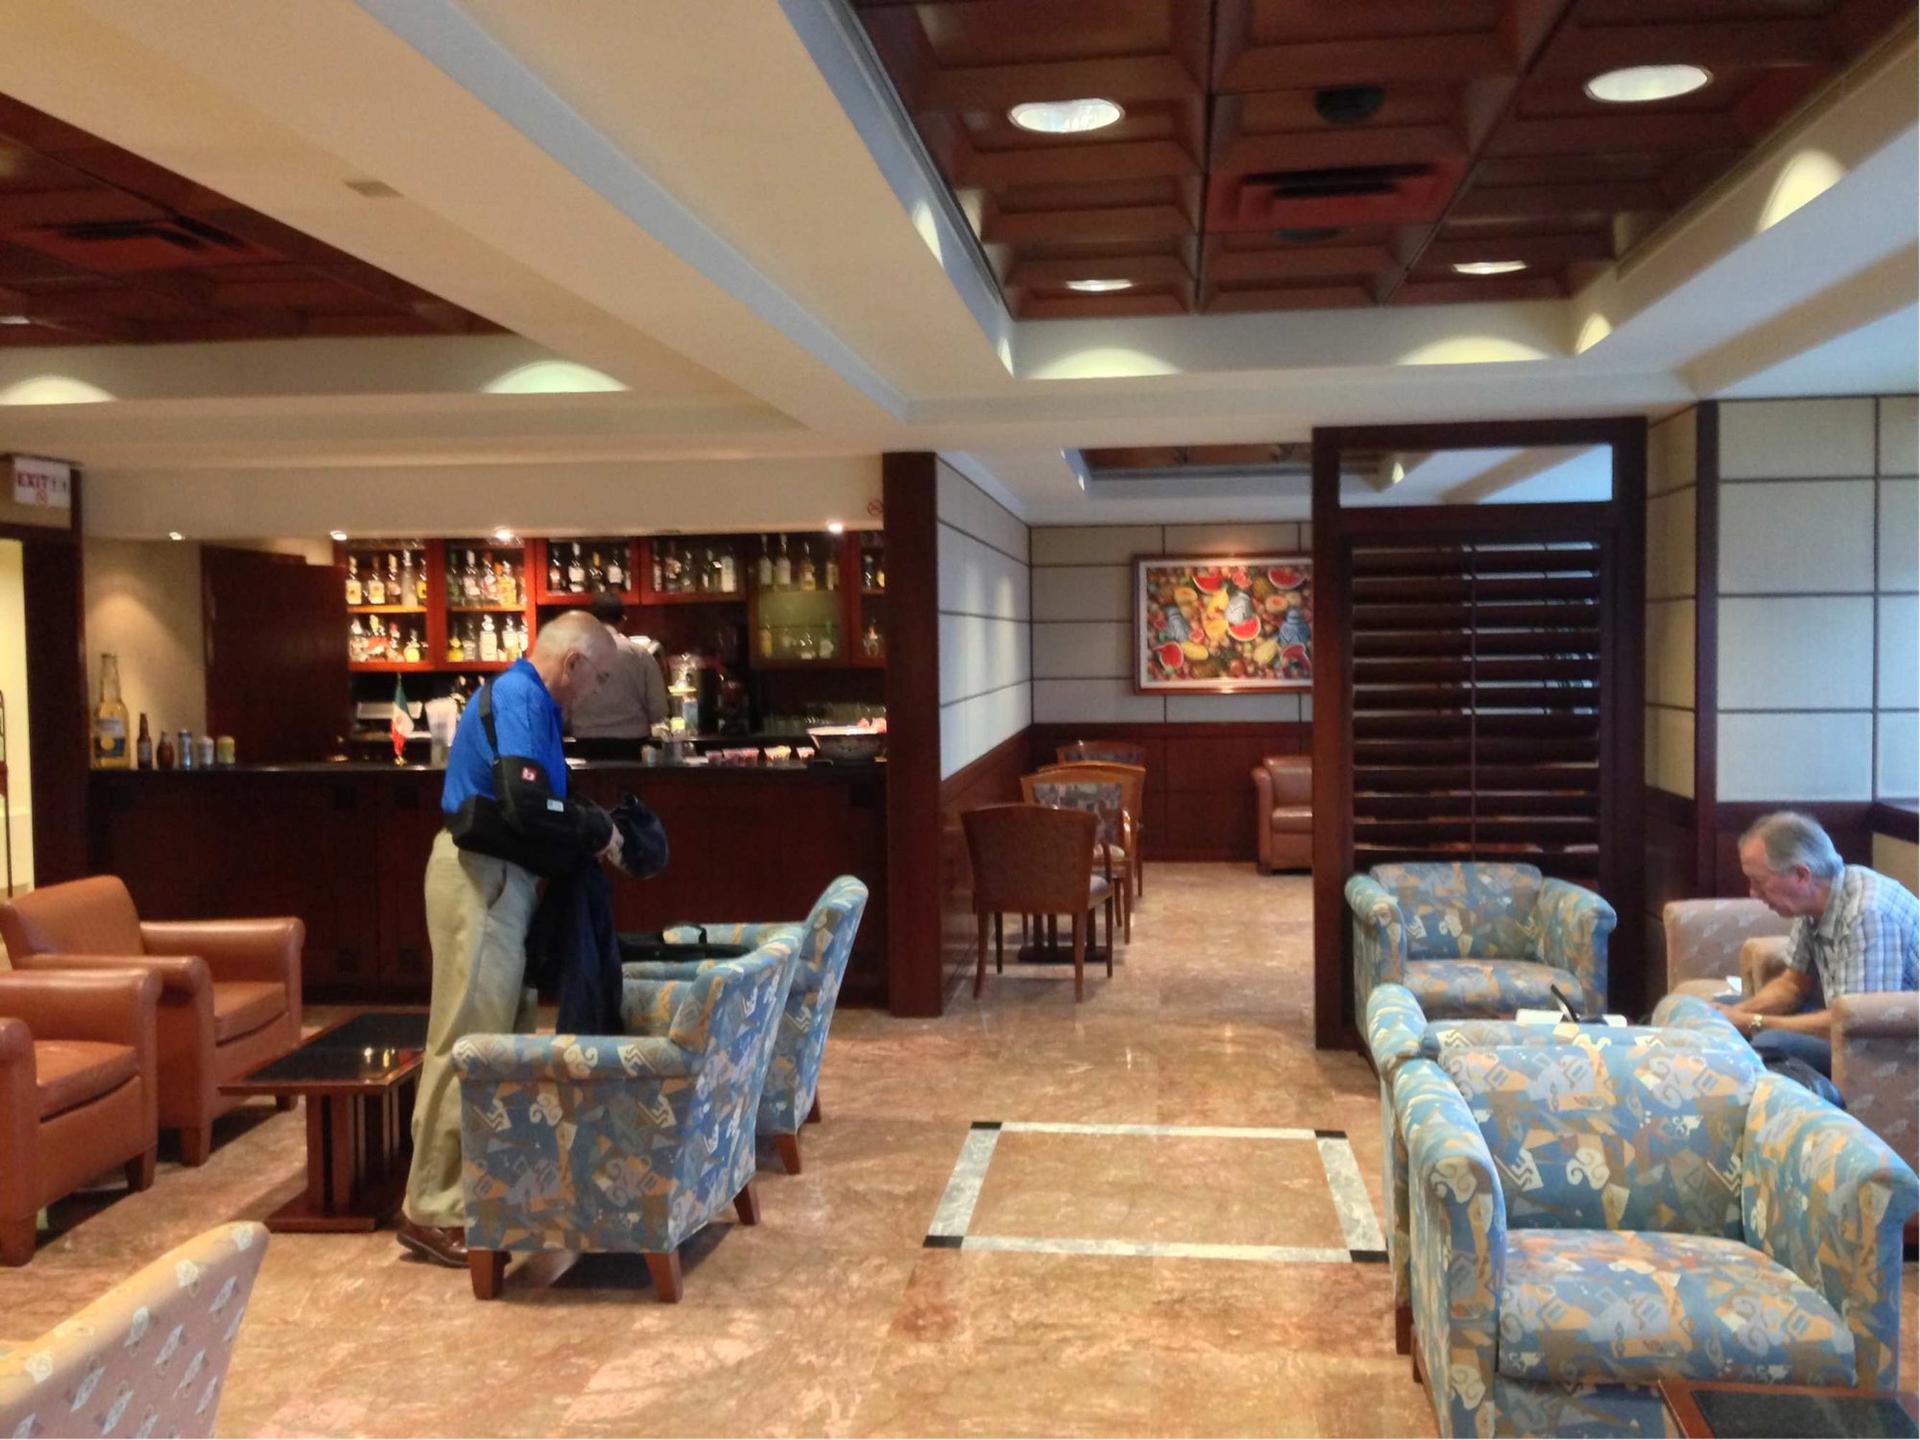 American Airlines Admirals Club image 22 of 32